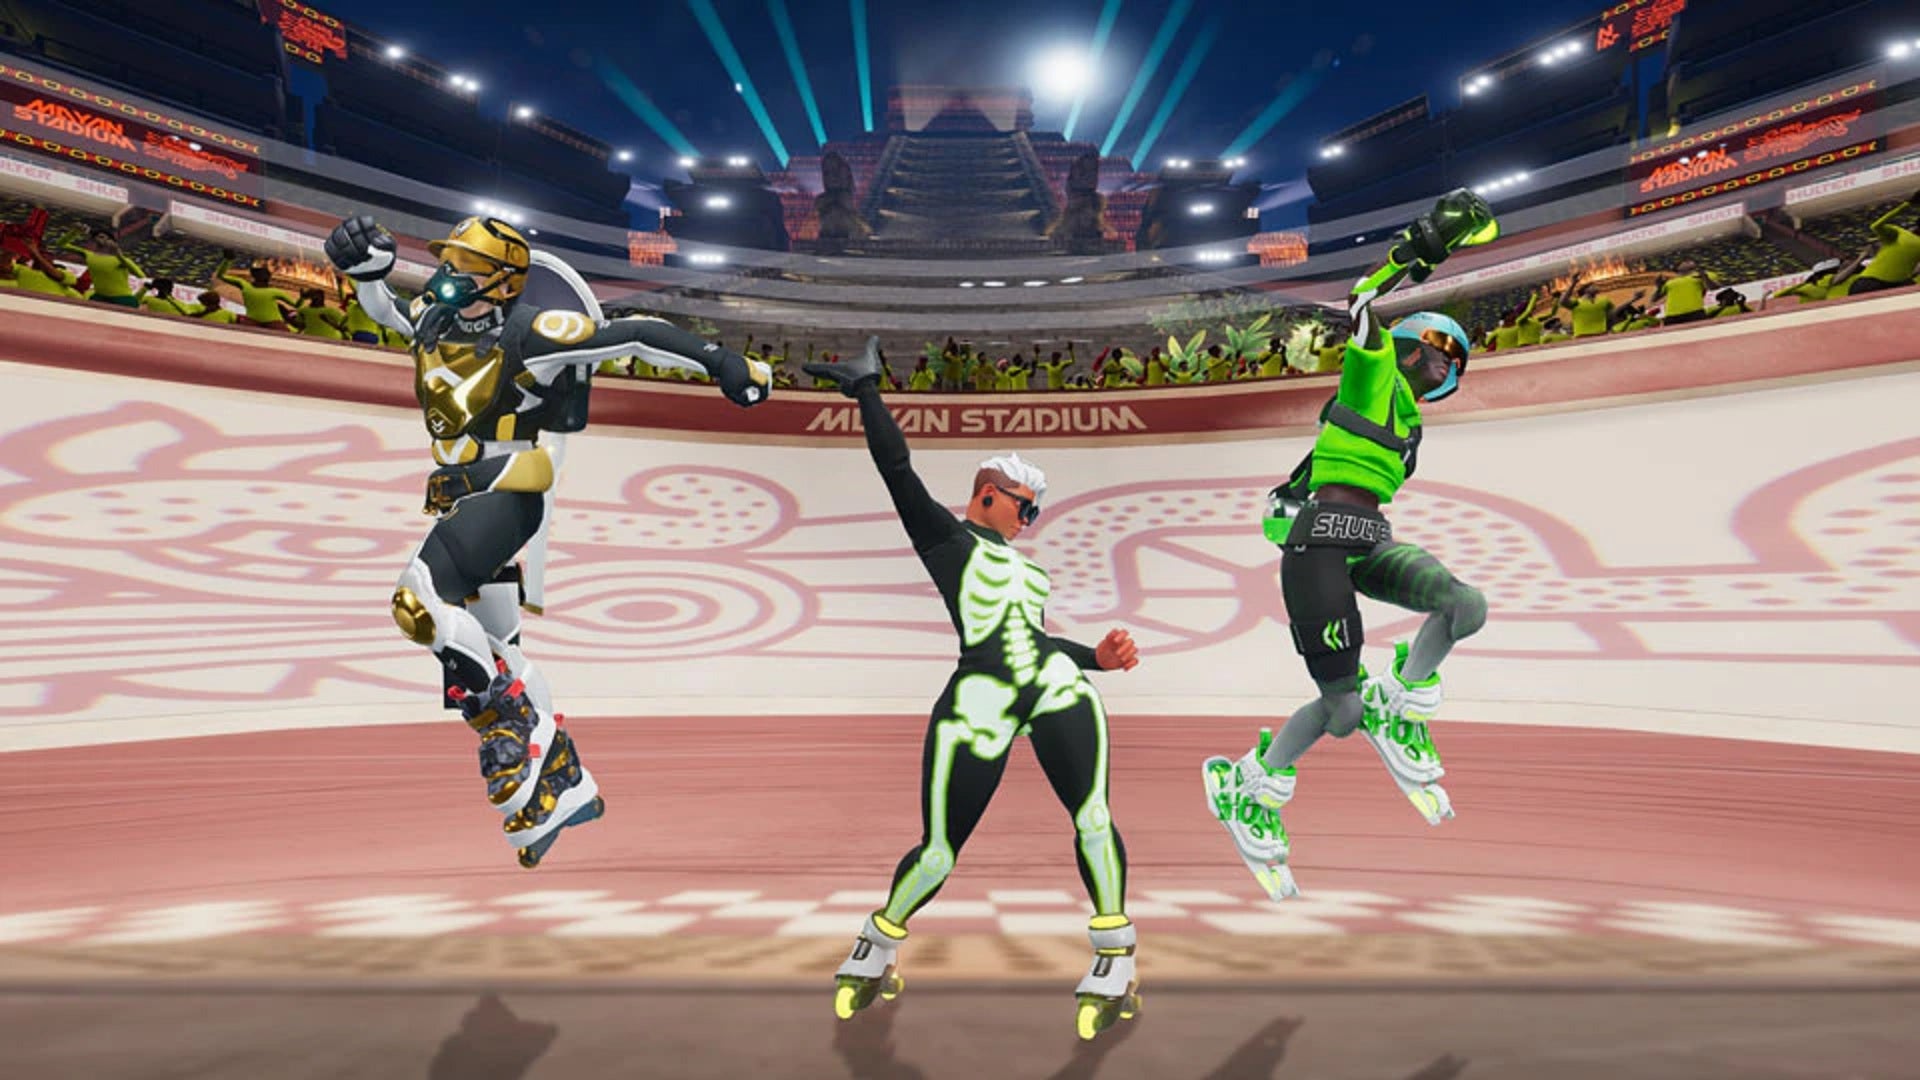 Roller Champions, Ubisoft's free-to-play PvP roller skating game, launches  May 25 | VG247